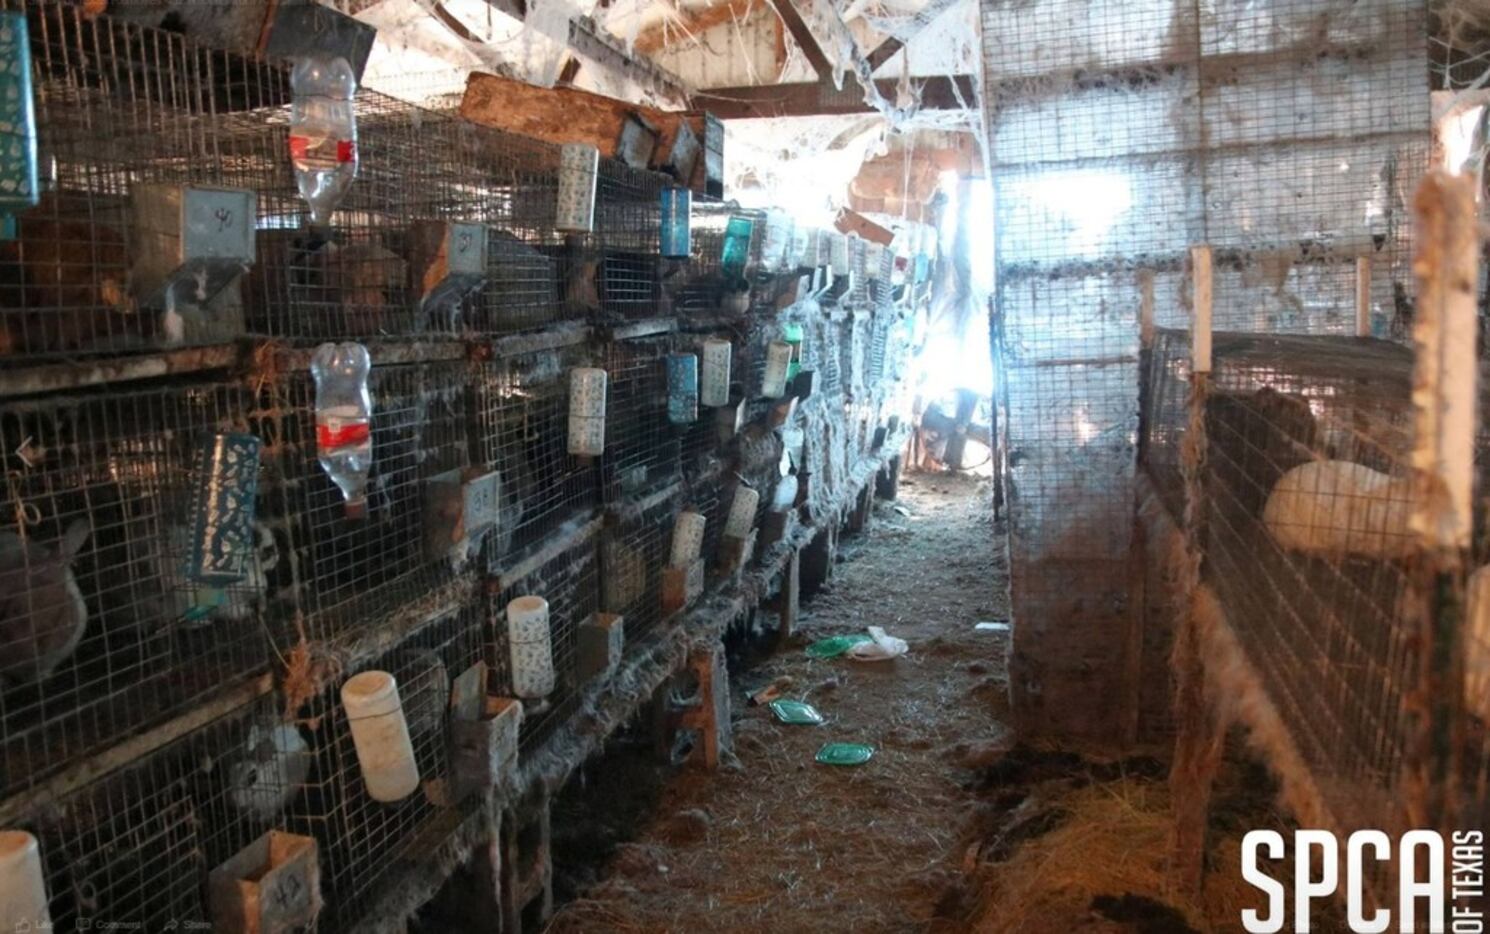 SPCA of Texas and Kaufman County officials rescued 452 rabbits from a shed Wednesday. The...